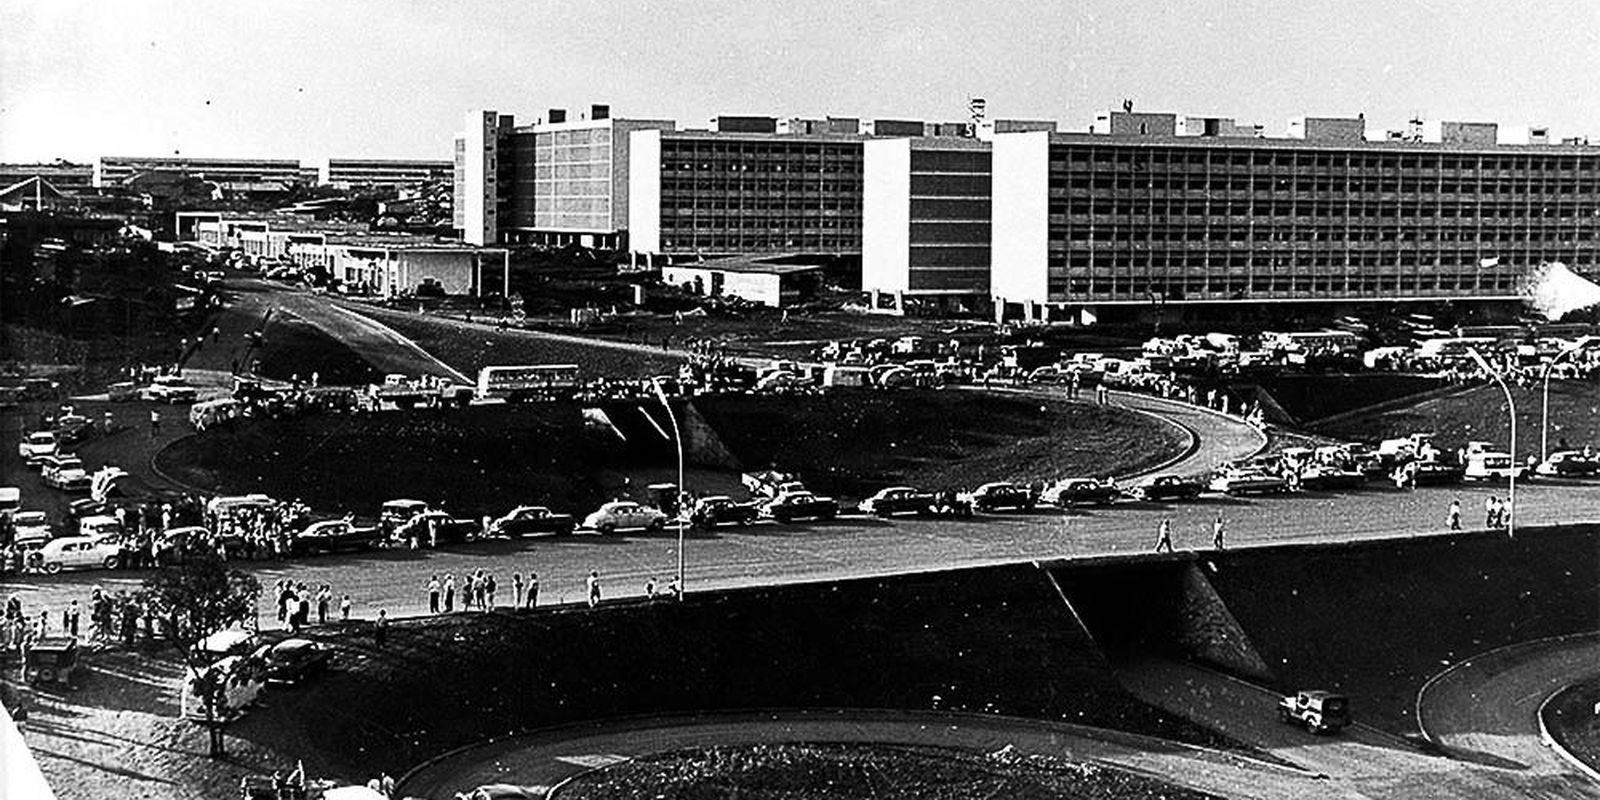 Senate will hold solemn session in honor of Brasilia's 62nd birthday